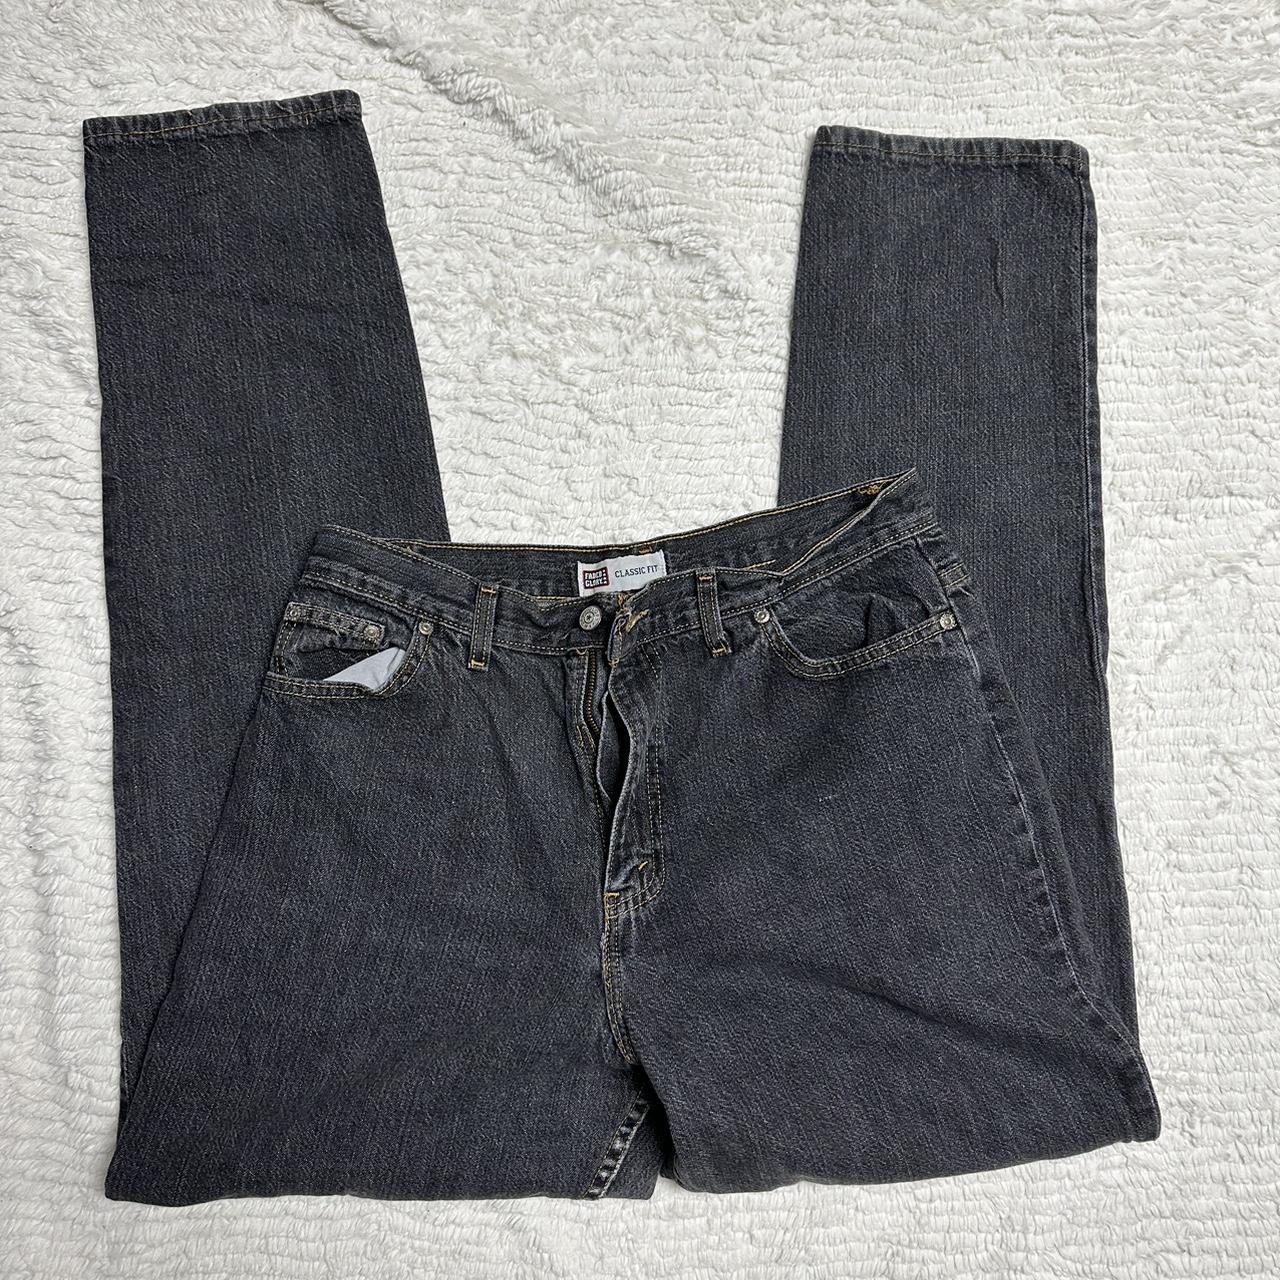 faded glory jeans they don't say a size but fit like - Depop